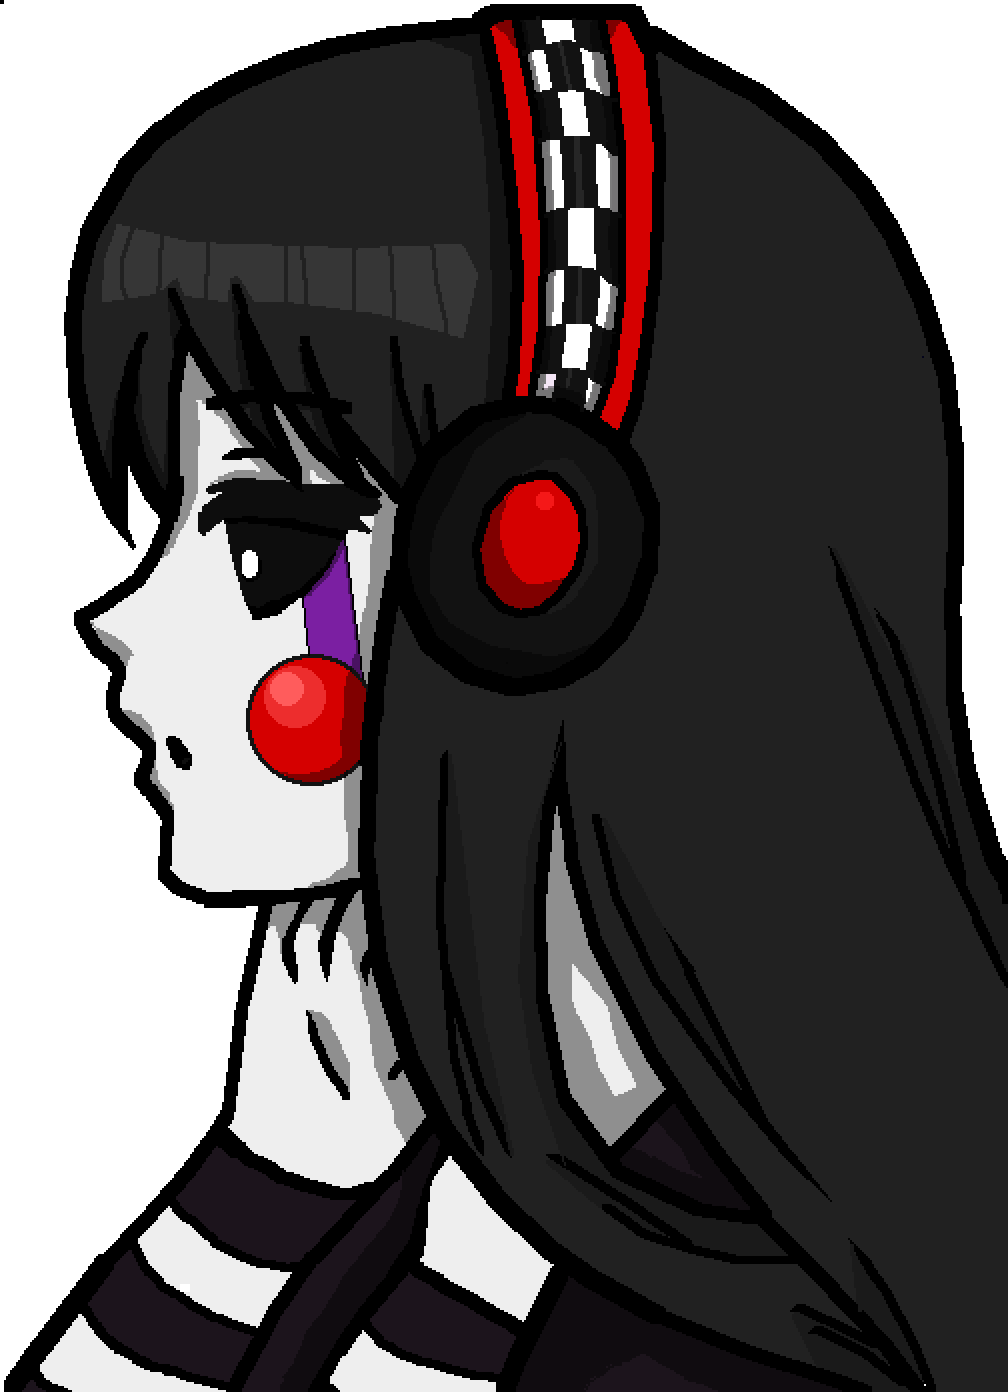 A Cartoon Of A Girl With Black Hair And Red And White Face With Red And Black Eyes